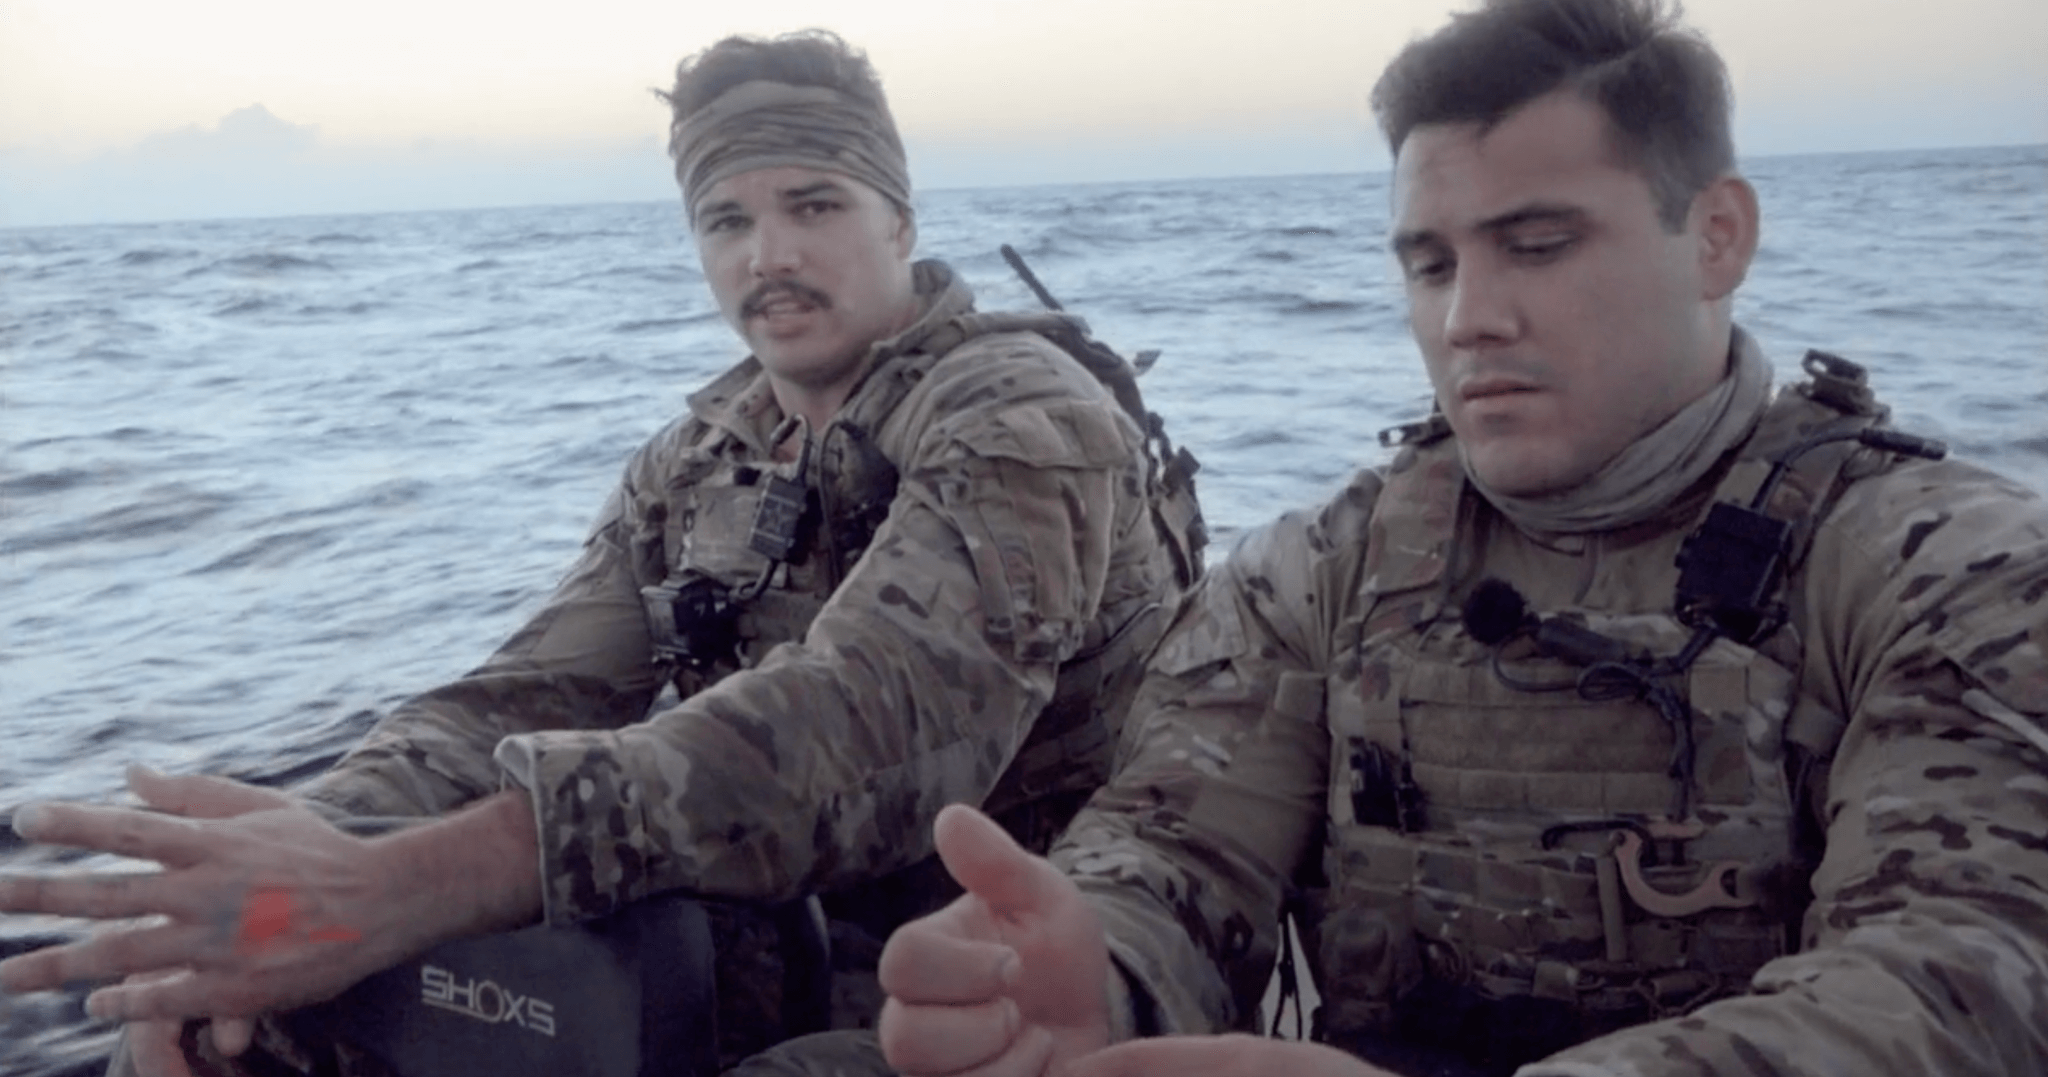 New show takes viewers behind the scenes of Coast Guard missions Military Career Military